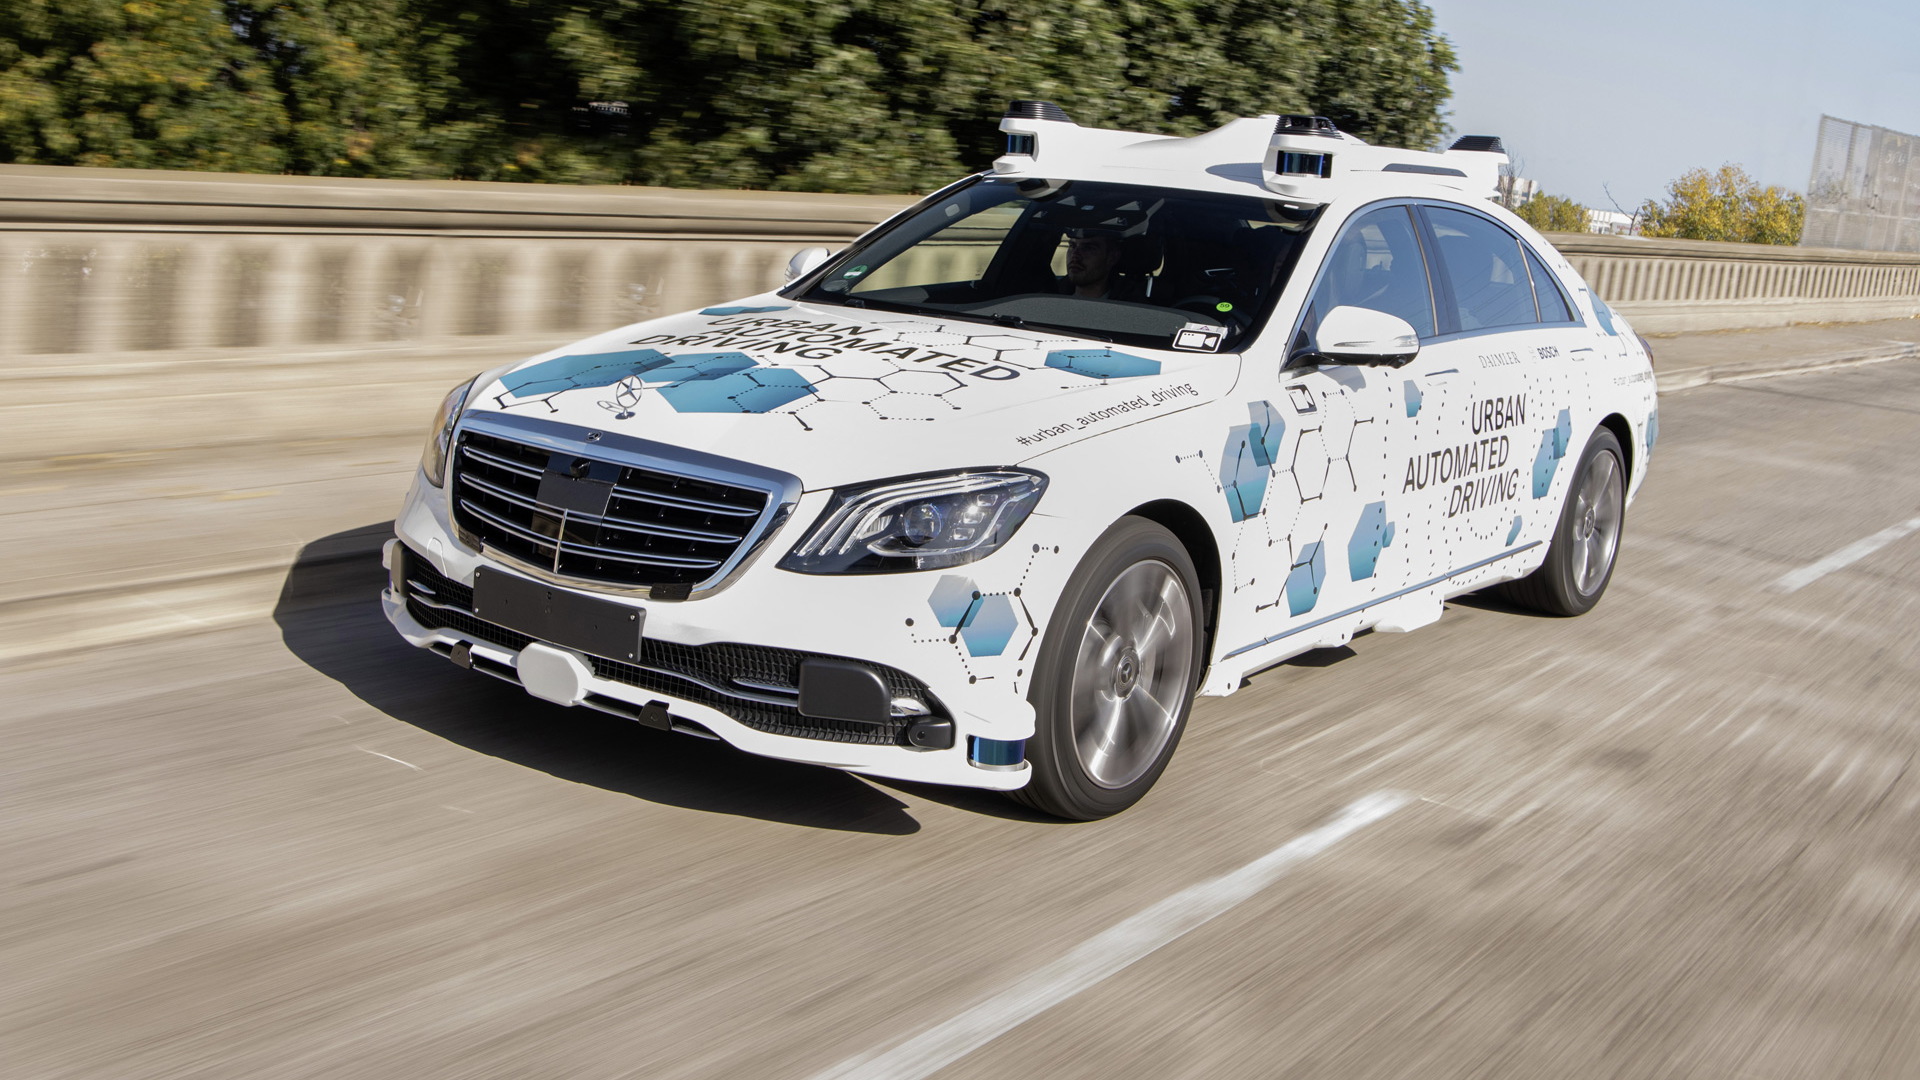 Daimler and Bosch self-driving car prototype in Silicon Valley